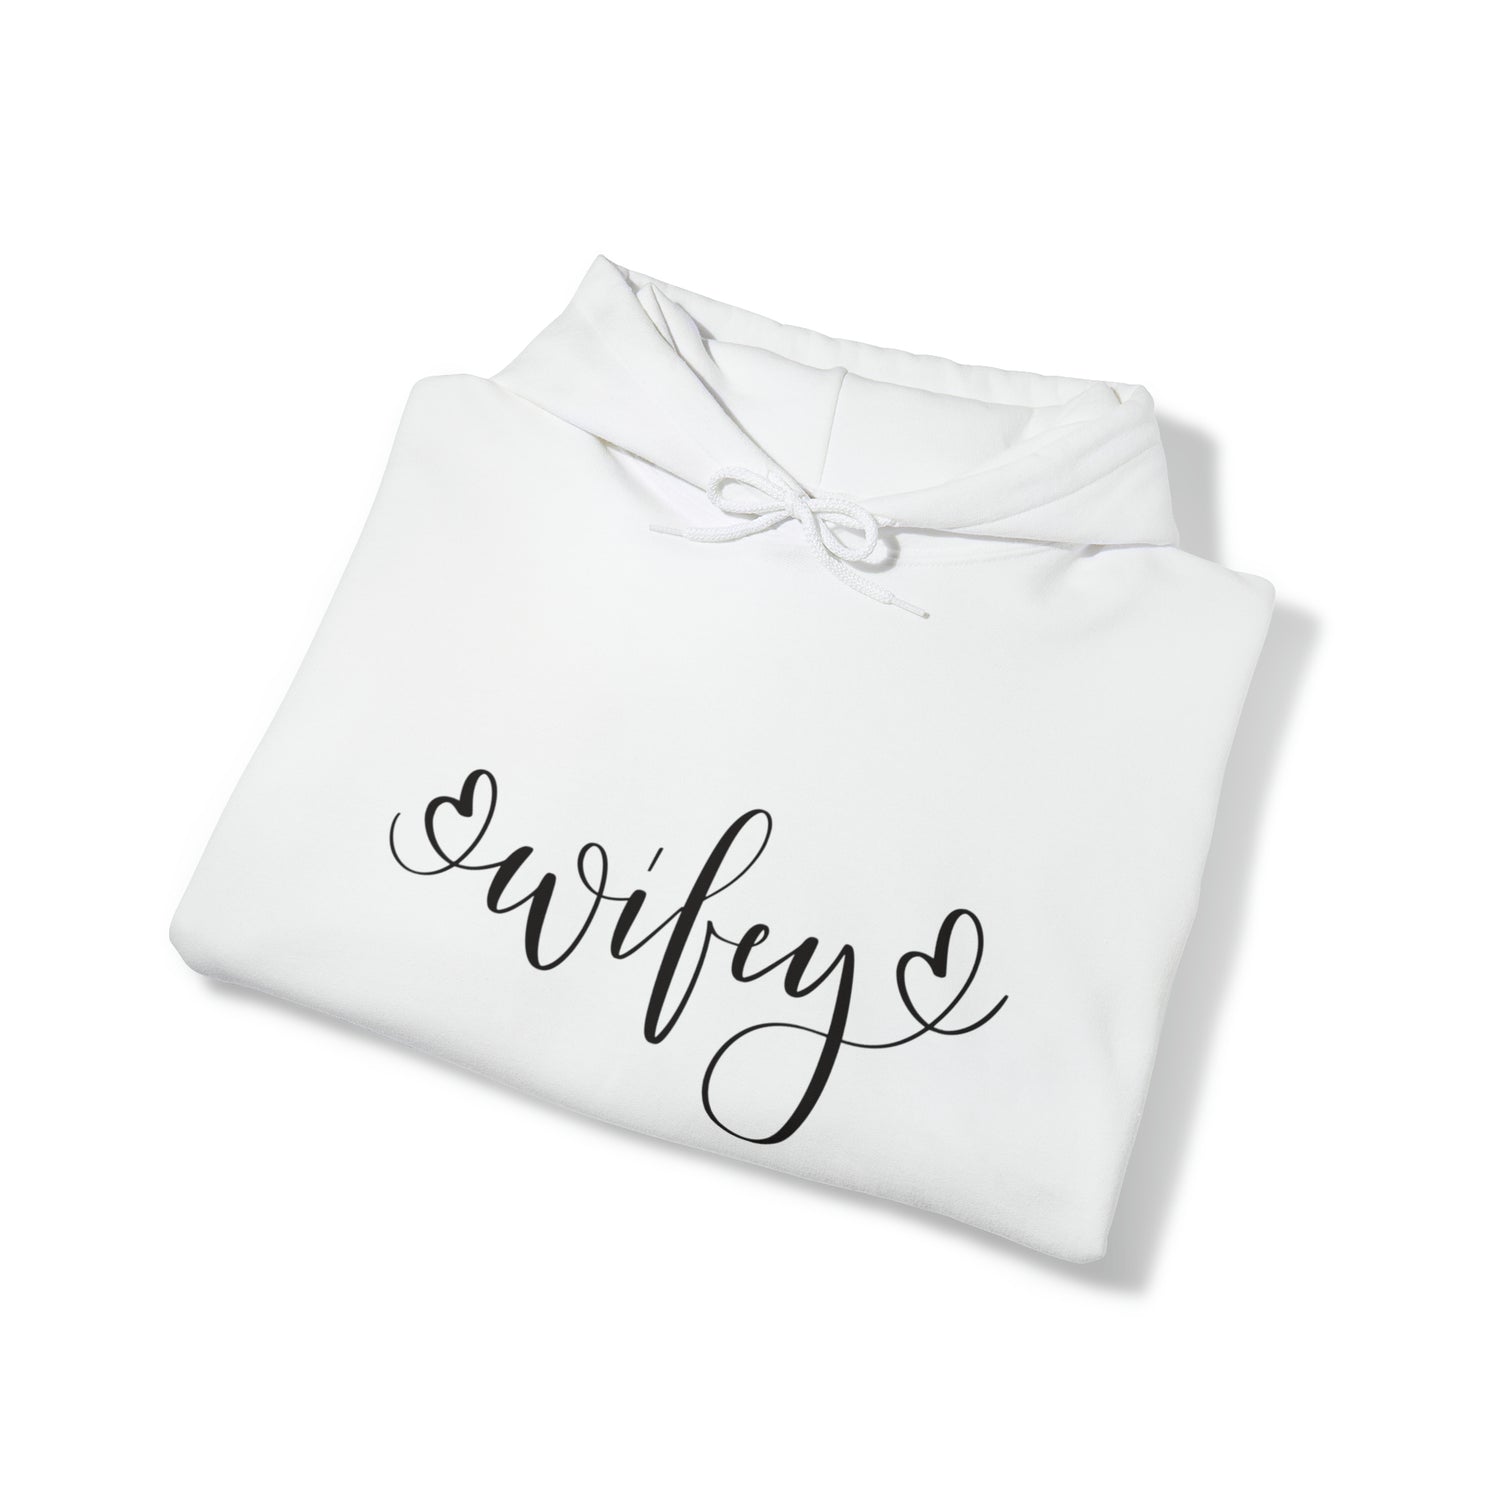 Wifey Hoodie. Perfect Gift for her!